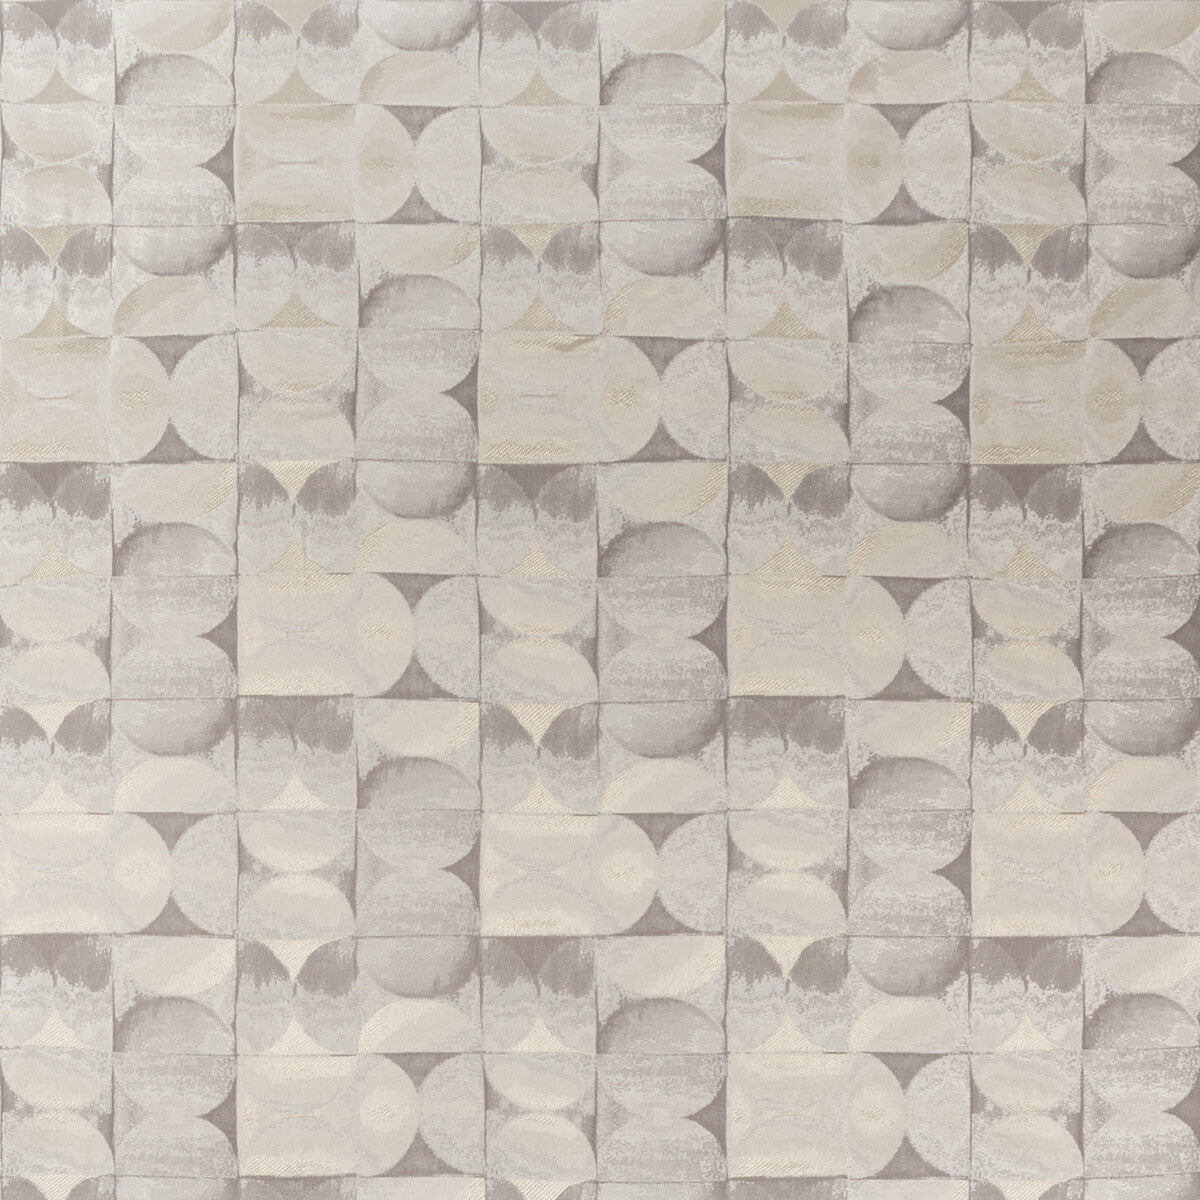 Moon Tide fabric in gray pearl color - pattern 4783.11.0 - by Kravet Contract in the Kravet Cruise collection